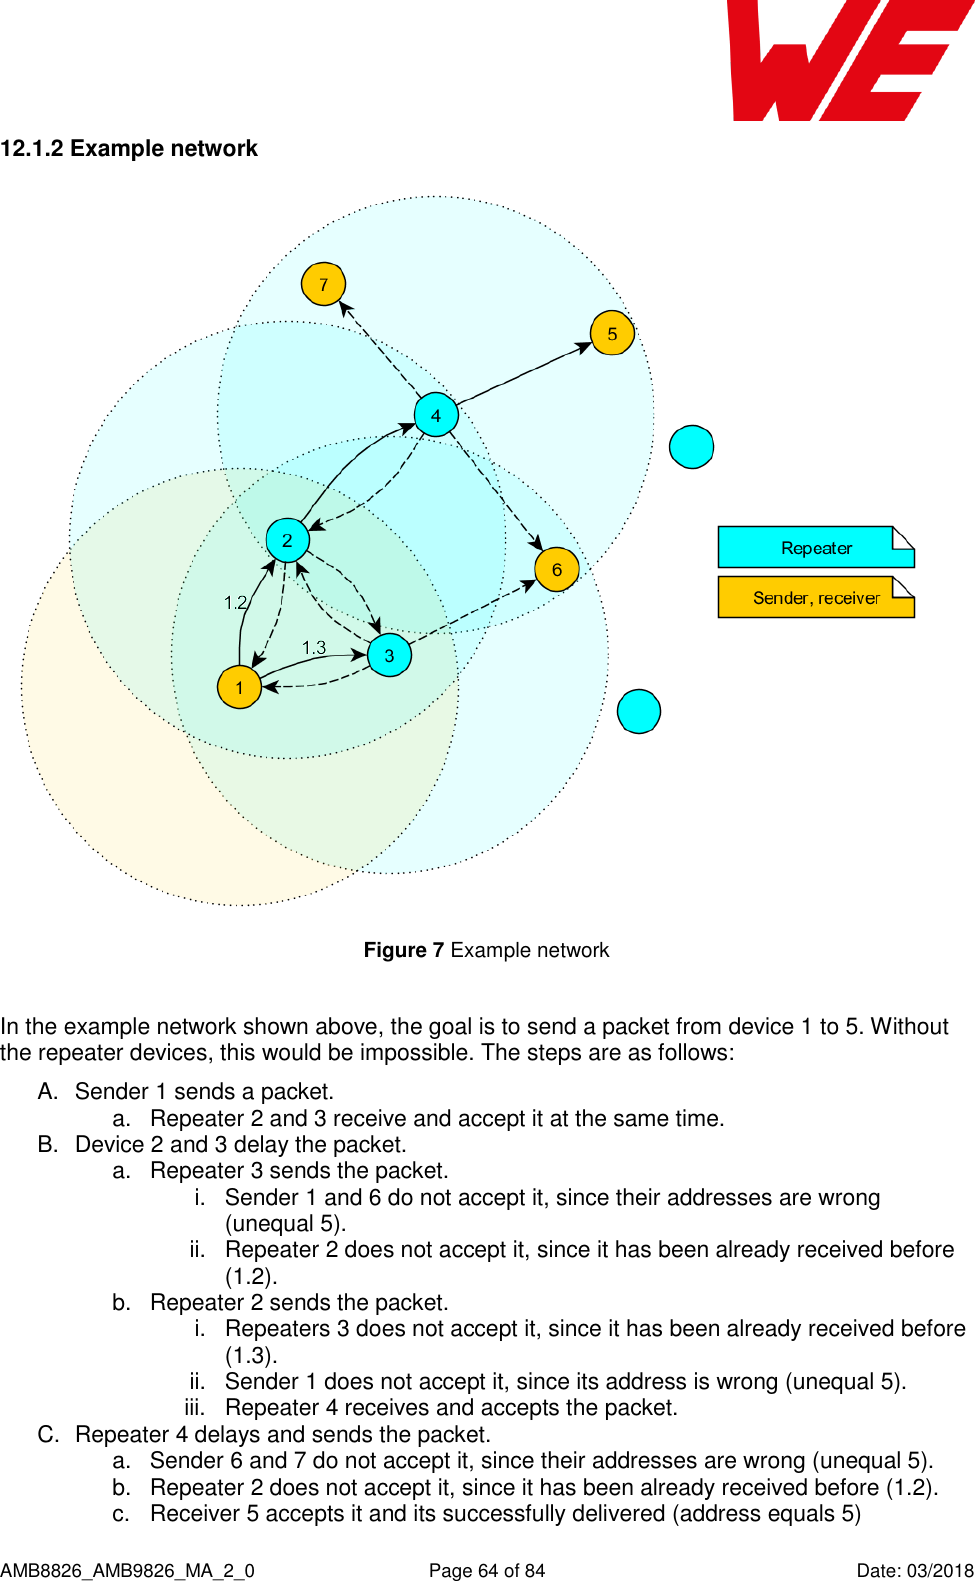      AMB8826_AMB9826_MA_2_0  Page 64 of 84  Date: 03/2018 12.1.2 Example network  Figure 7 Example network  In the example network shown above, the goal is to send a packet from device 1 to 5. Without the repeater devices, this would be impossible. The steps are as follows: A.  Sender 1 sends a packet. a.  Repeater 2 and 3 receive and accept it at the same time. B.  Device 2 and 3 delay the packet. a.  Repeater 3 sends the packet.  i.  Sender 1 and 6 do not accept it, since their addresses are wrong (unequal 5). ii.  Repeater 2 does not accept it, since it has been already received before (1.2). b.  Repeater 2 sends the packet.  i.  Repeaters 3 does not accept it, since it has been already received before (1.3). ii.  Sender 1 does not accept it, since its address is wrong (unequal 5). iii.  Repeater 4 receives and accepts the packet. C.  Repeater 4 delays and sends the packet. a.  Sender 6 and 7 do not accept it, since their addresses are wrong (unequal 5). b.  Repeater 2 does not accept it, since it has been already received before (1.2). c.  Receiver 5 accepts it and its successfully delivered (address equals 5) 